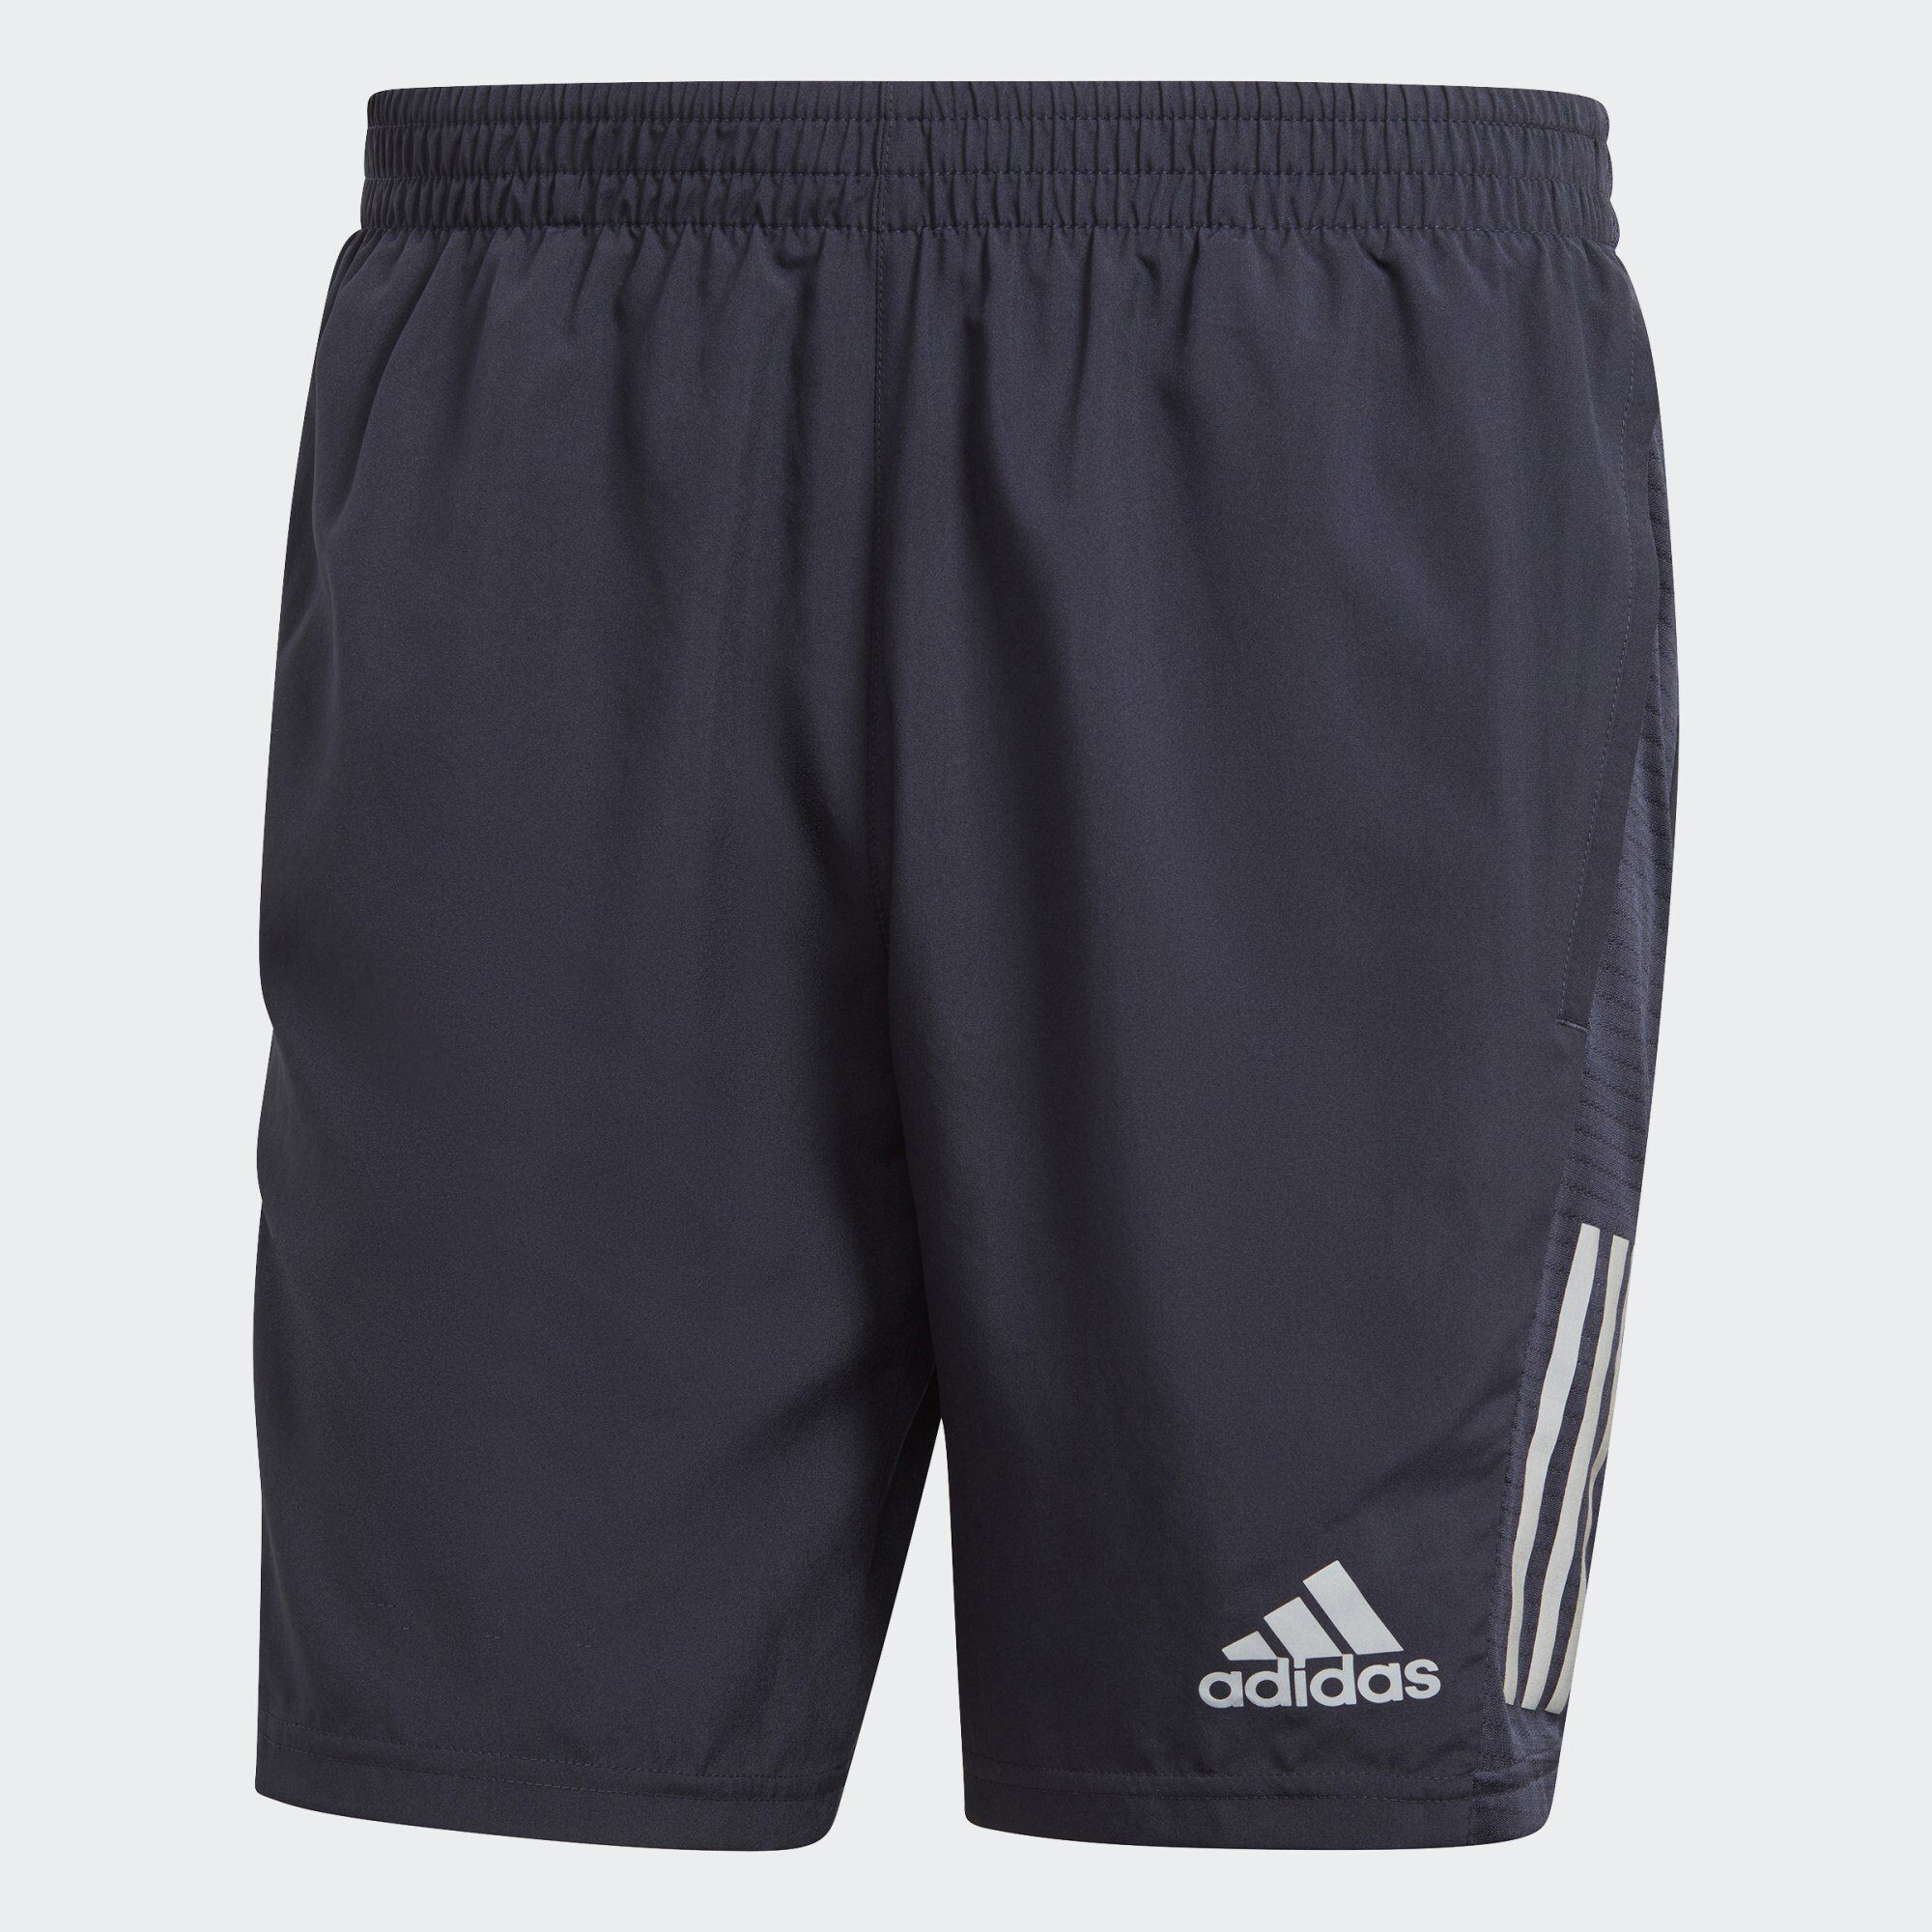 Legend Laufshorts / RUN Silver SHORTS THE adidas Performance Reflective Ink OWN